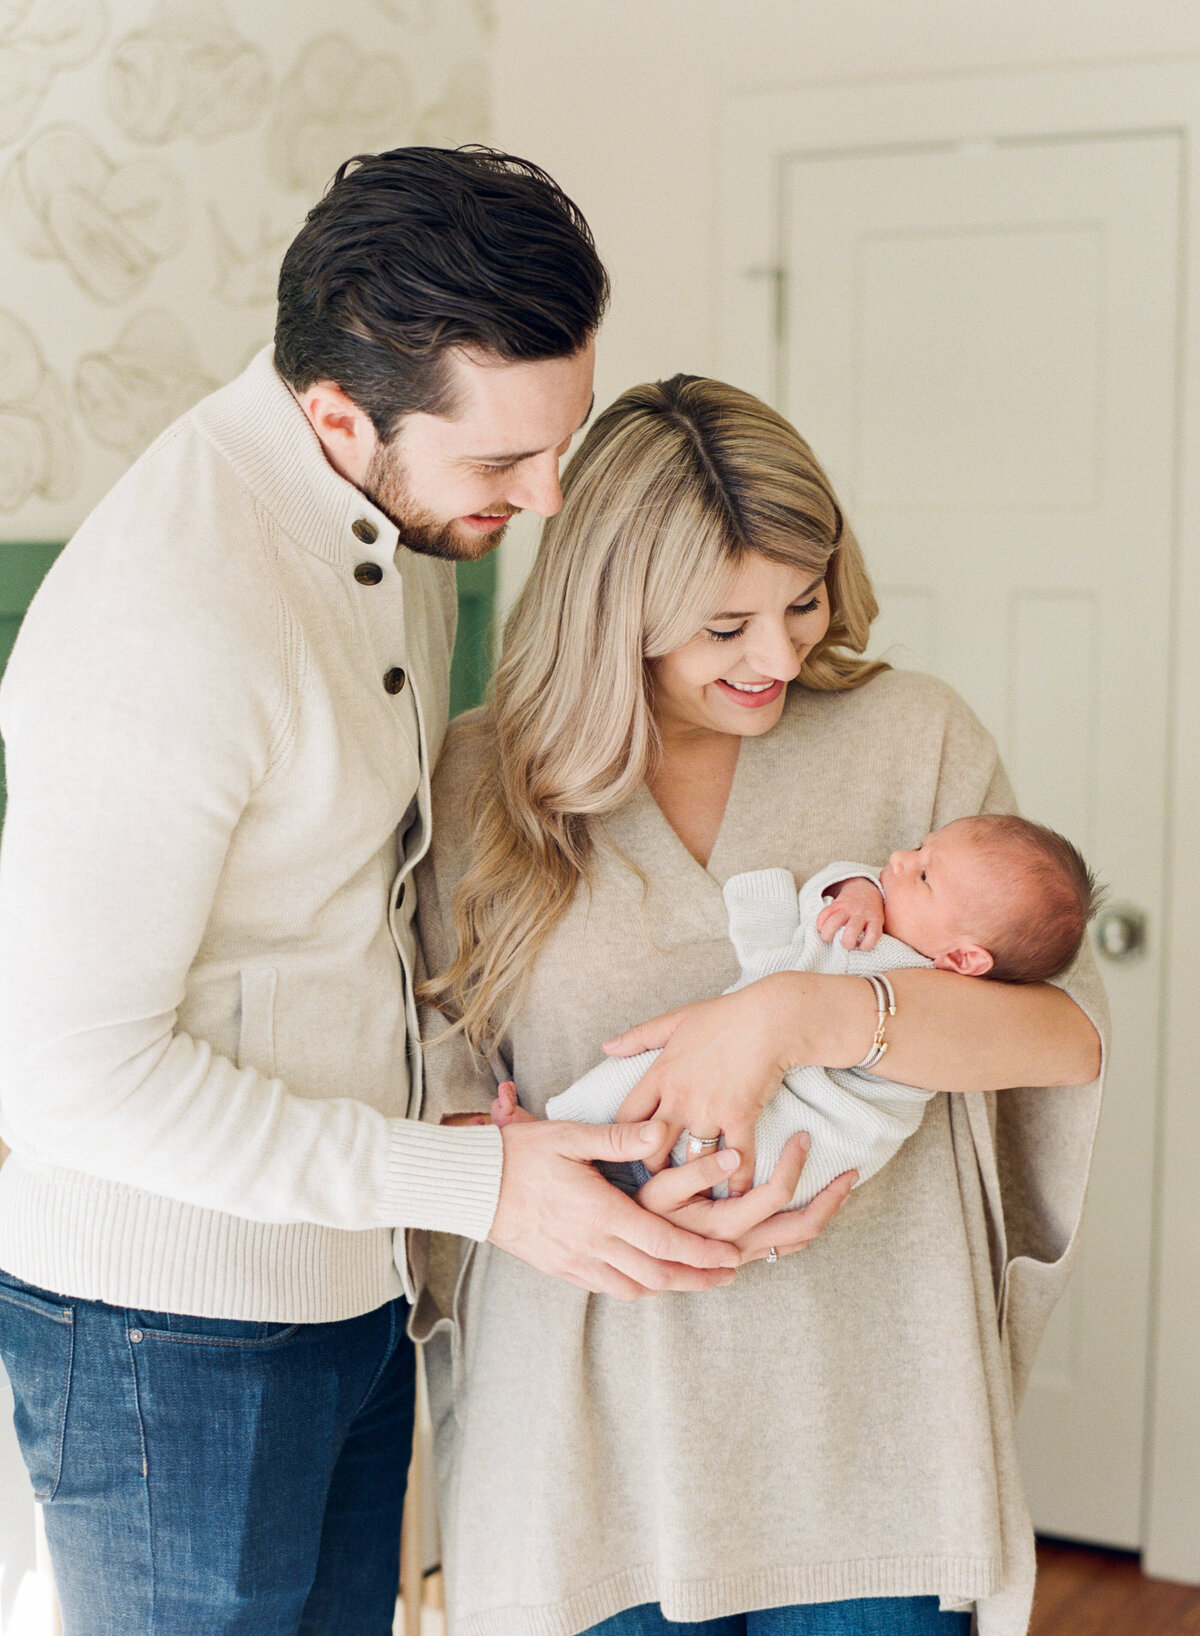 Mom holds newborn baby while dad snuggles her and they smile at the baby during a Raleigh newborn photo session. Photo by Raleigh Newborn Photography A.J. Dunlap Photography.